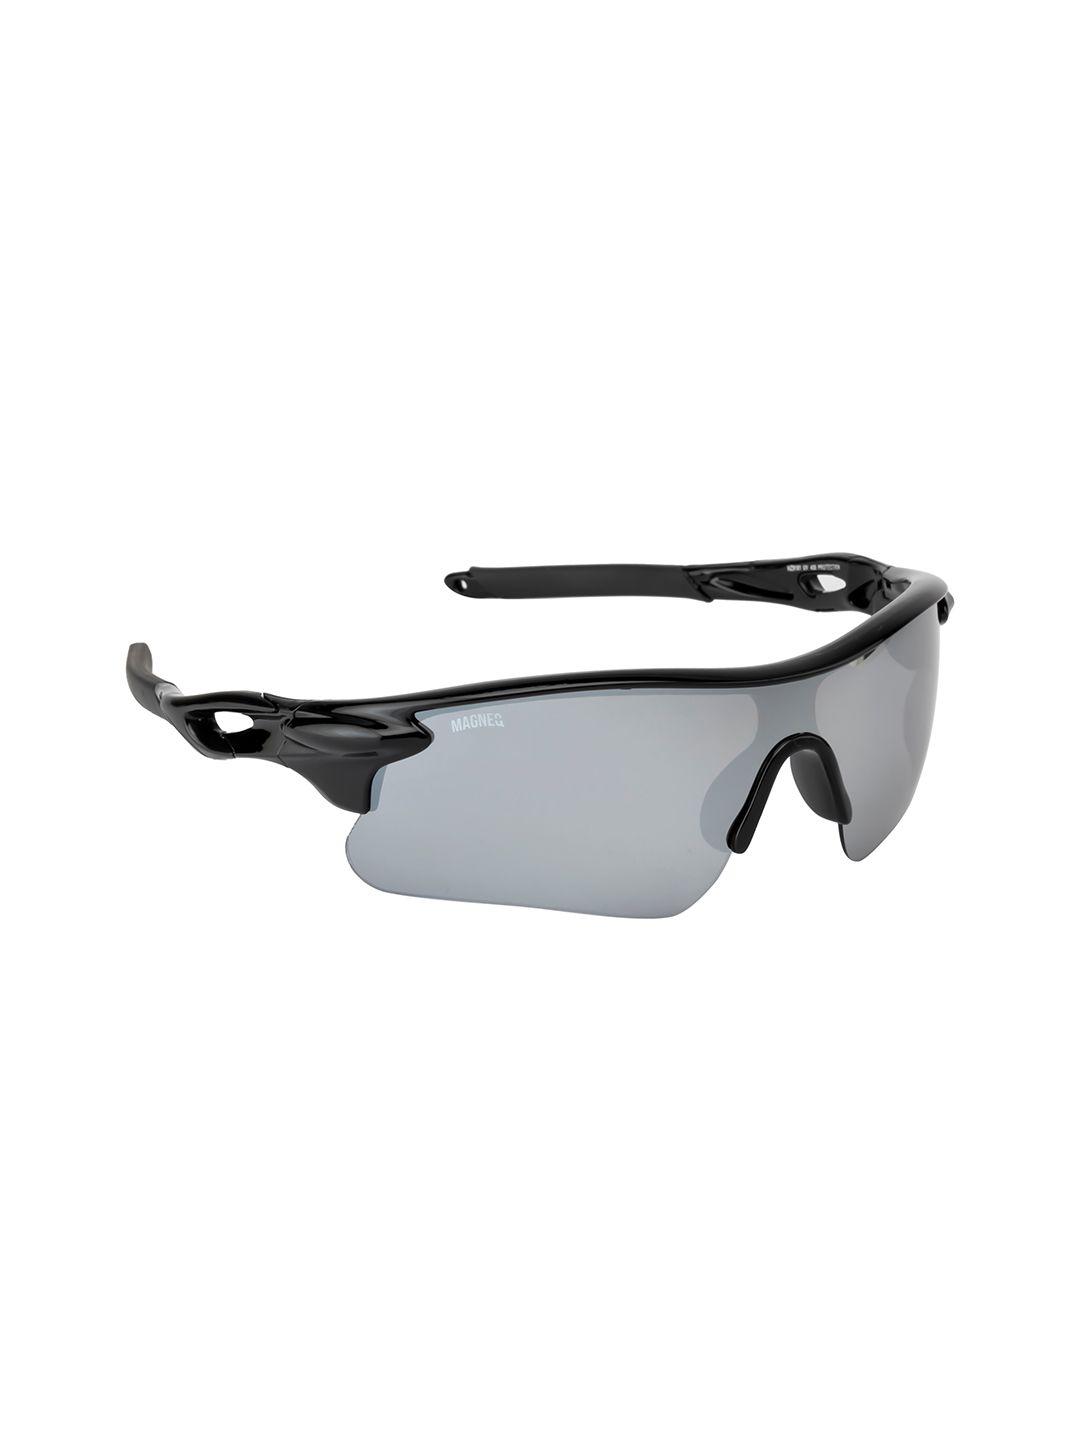 magneq lens & black shield sunglasses with uv protected lens mg 9181/s c1 hz 7020